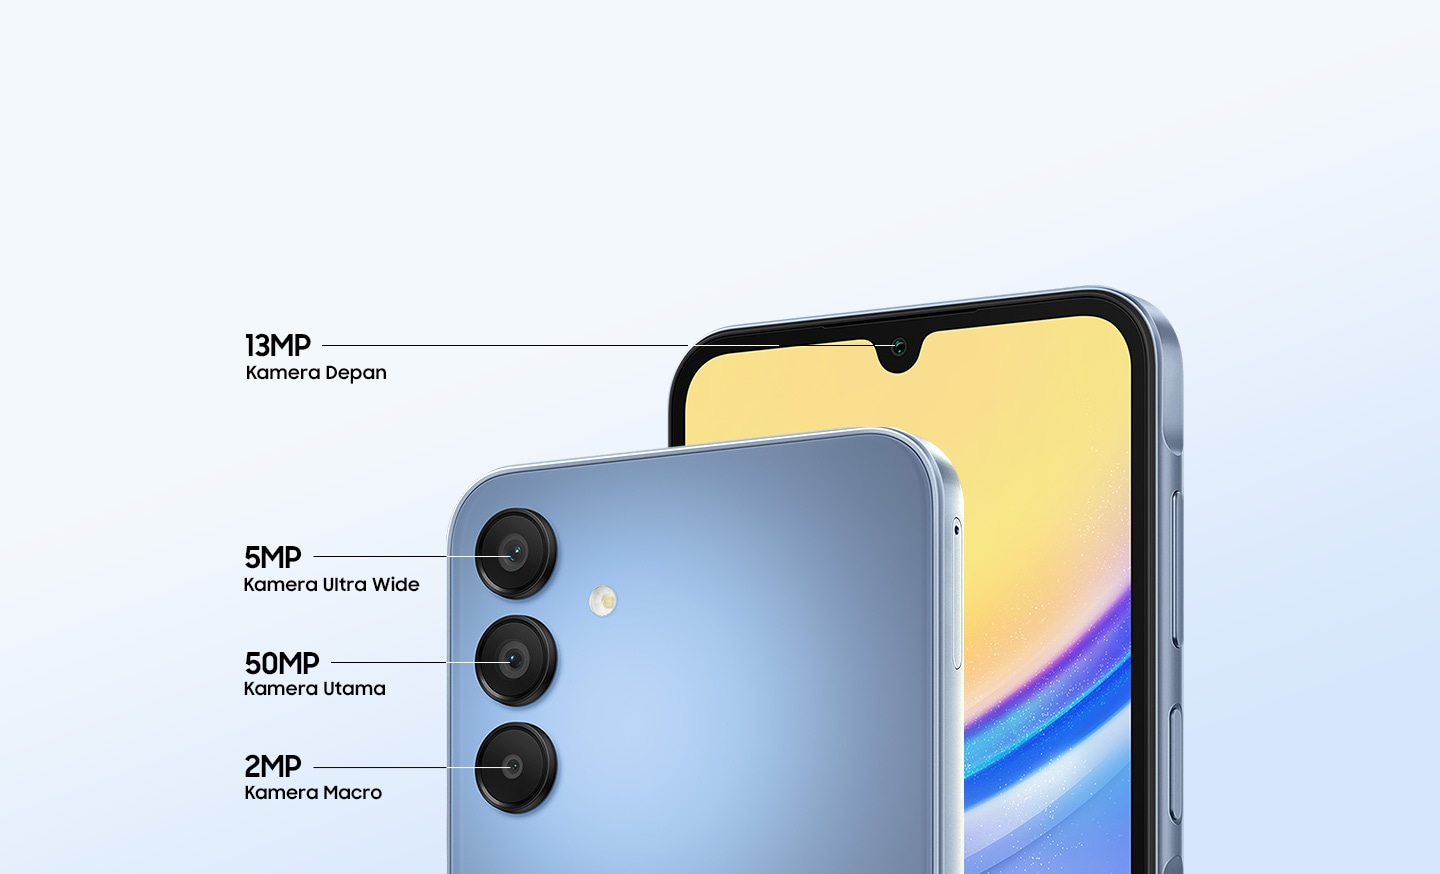 The front and back of the Galaxy A15 5G are shown to showcase its four multiple cameras including the 13MP Front camera, the 5MP Ultra Wide camera, the 50MP Main camera and the 2MP Macro camera.